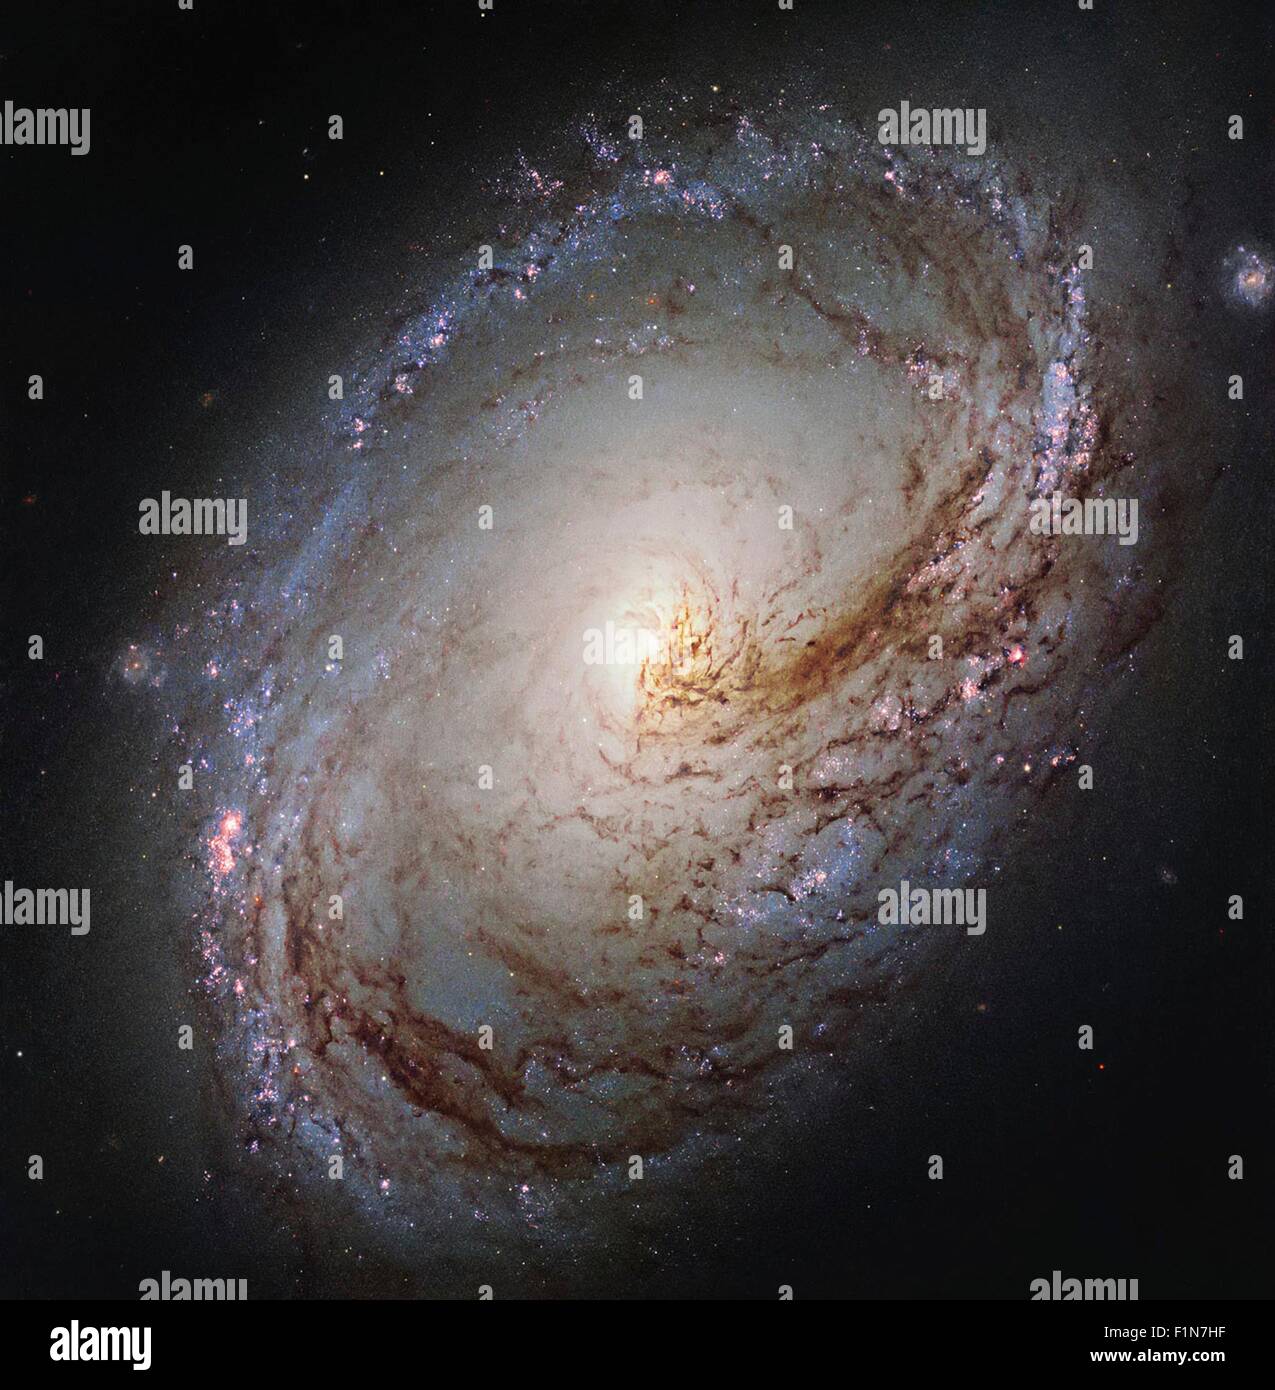 Hubble Space Telescope image shows Messier 96, a spiral galaxy just over 35 million light-years away in the constellation of Leo. The galaxy resembles a giant maelstrom of glowing gas, rippled with dark dust that swirls inwards towards the nucleus. Stock Photo